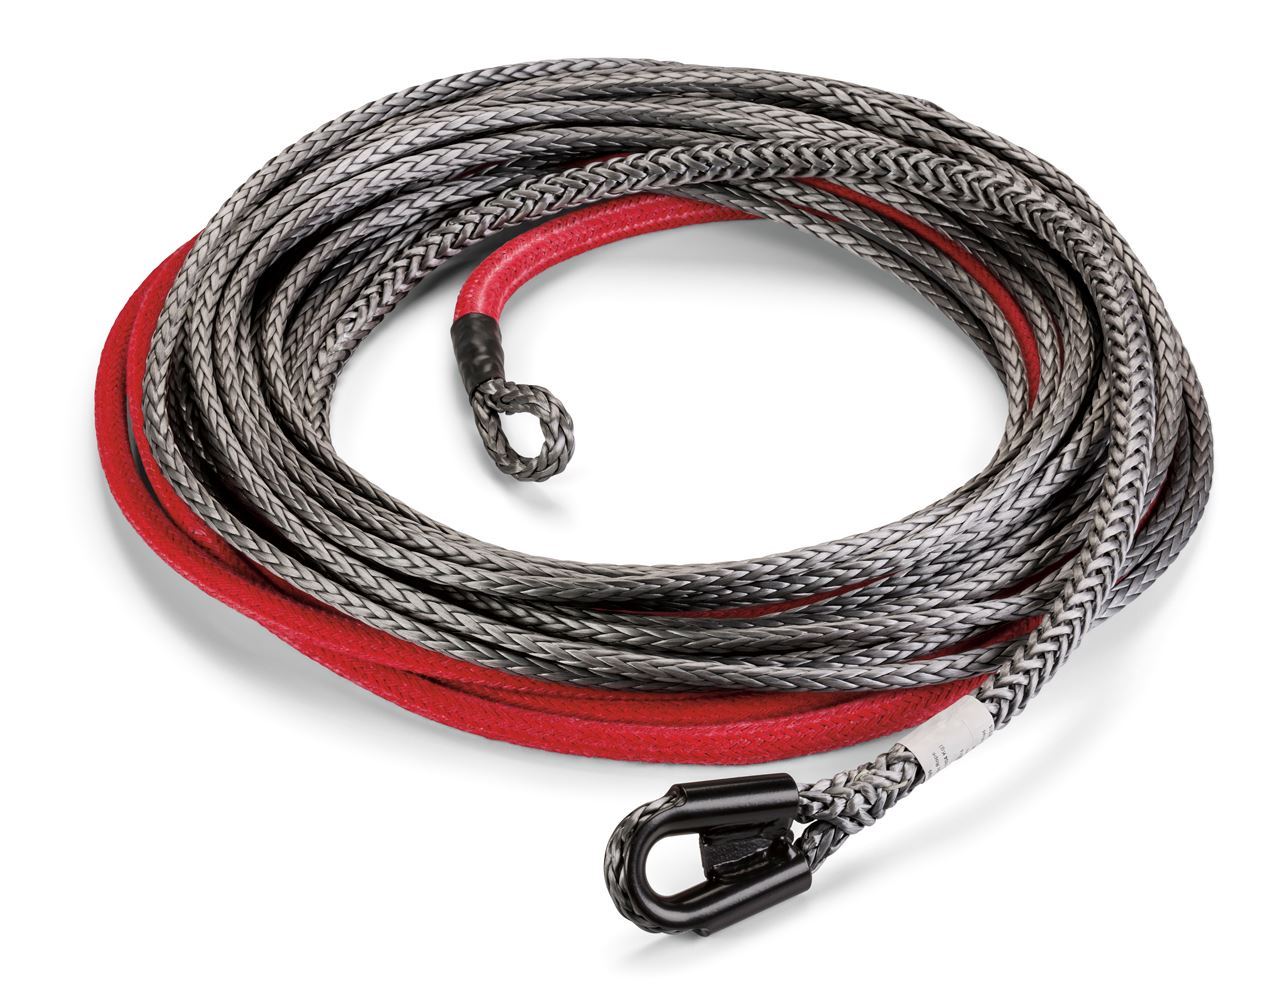 Warn 3/8 in. (9.5mm) X 80 ft. (24.4m) Spydura Pro Cable - Click Image to Close